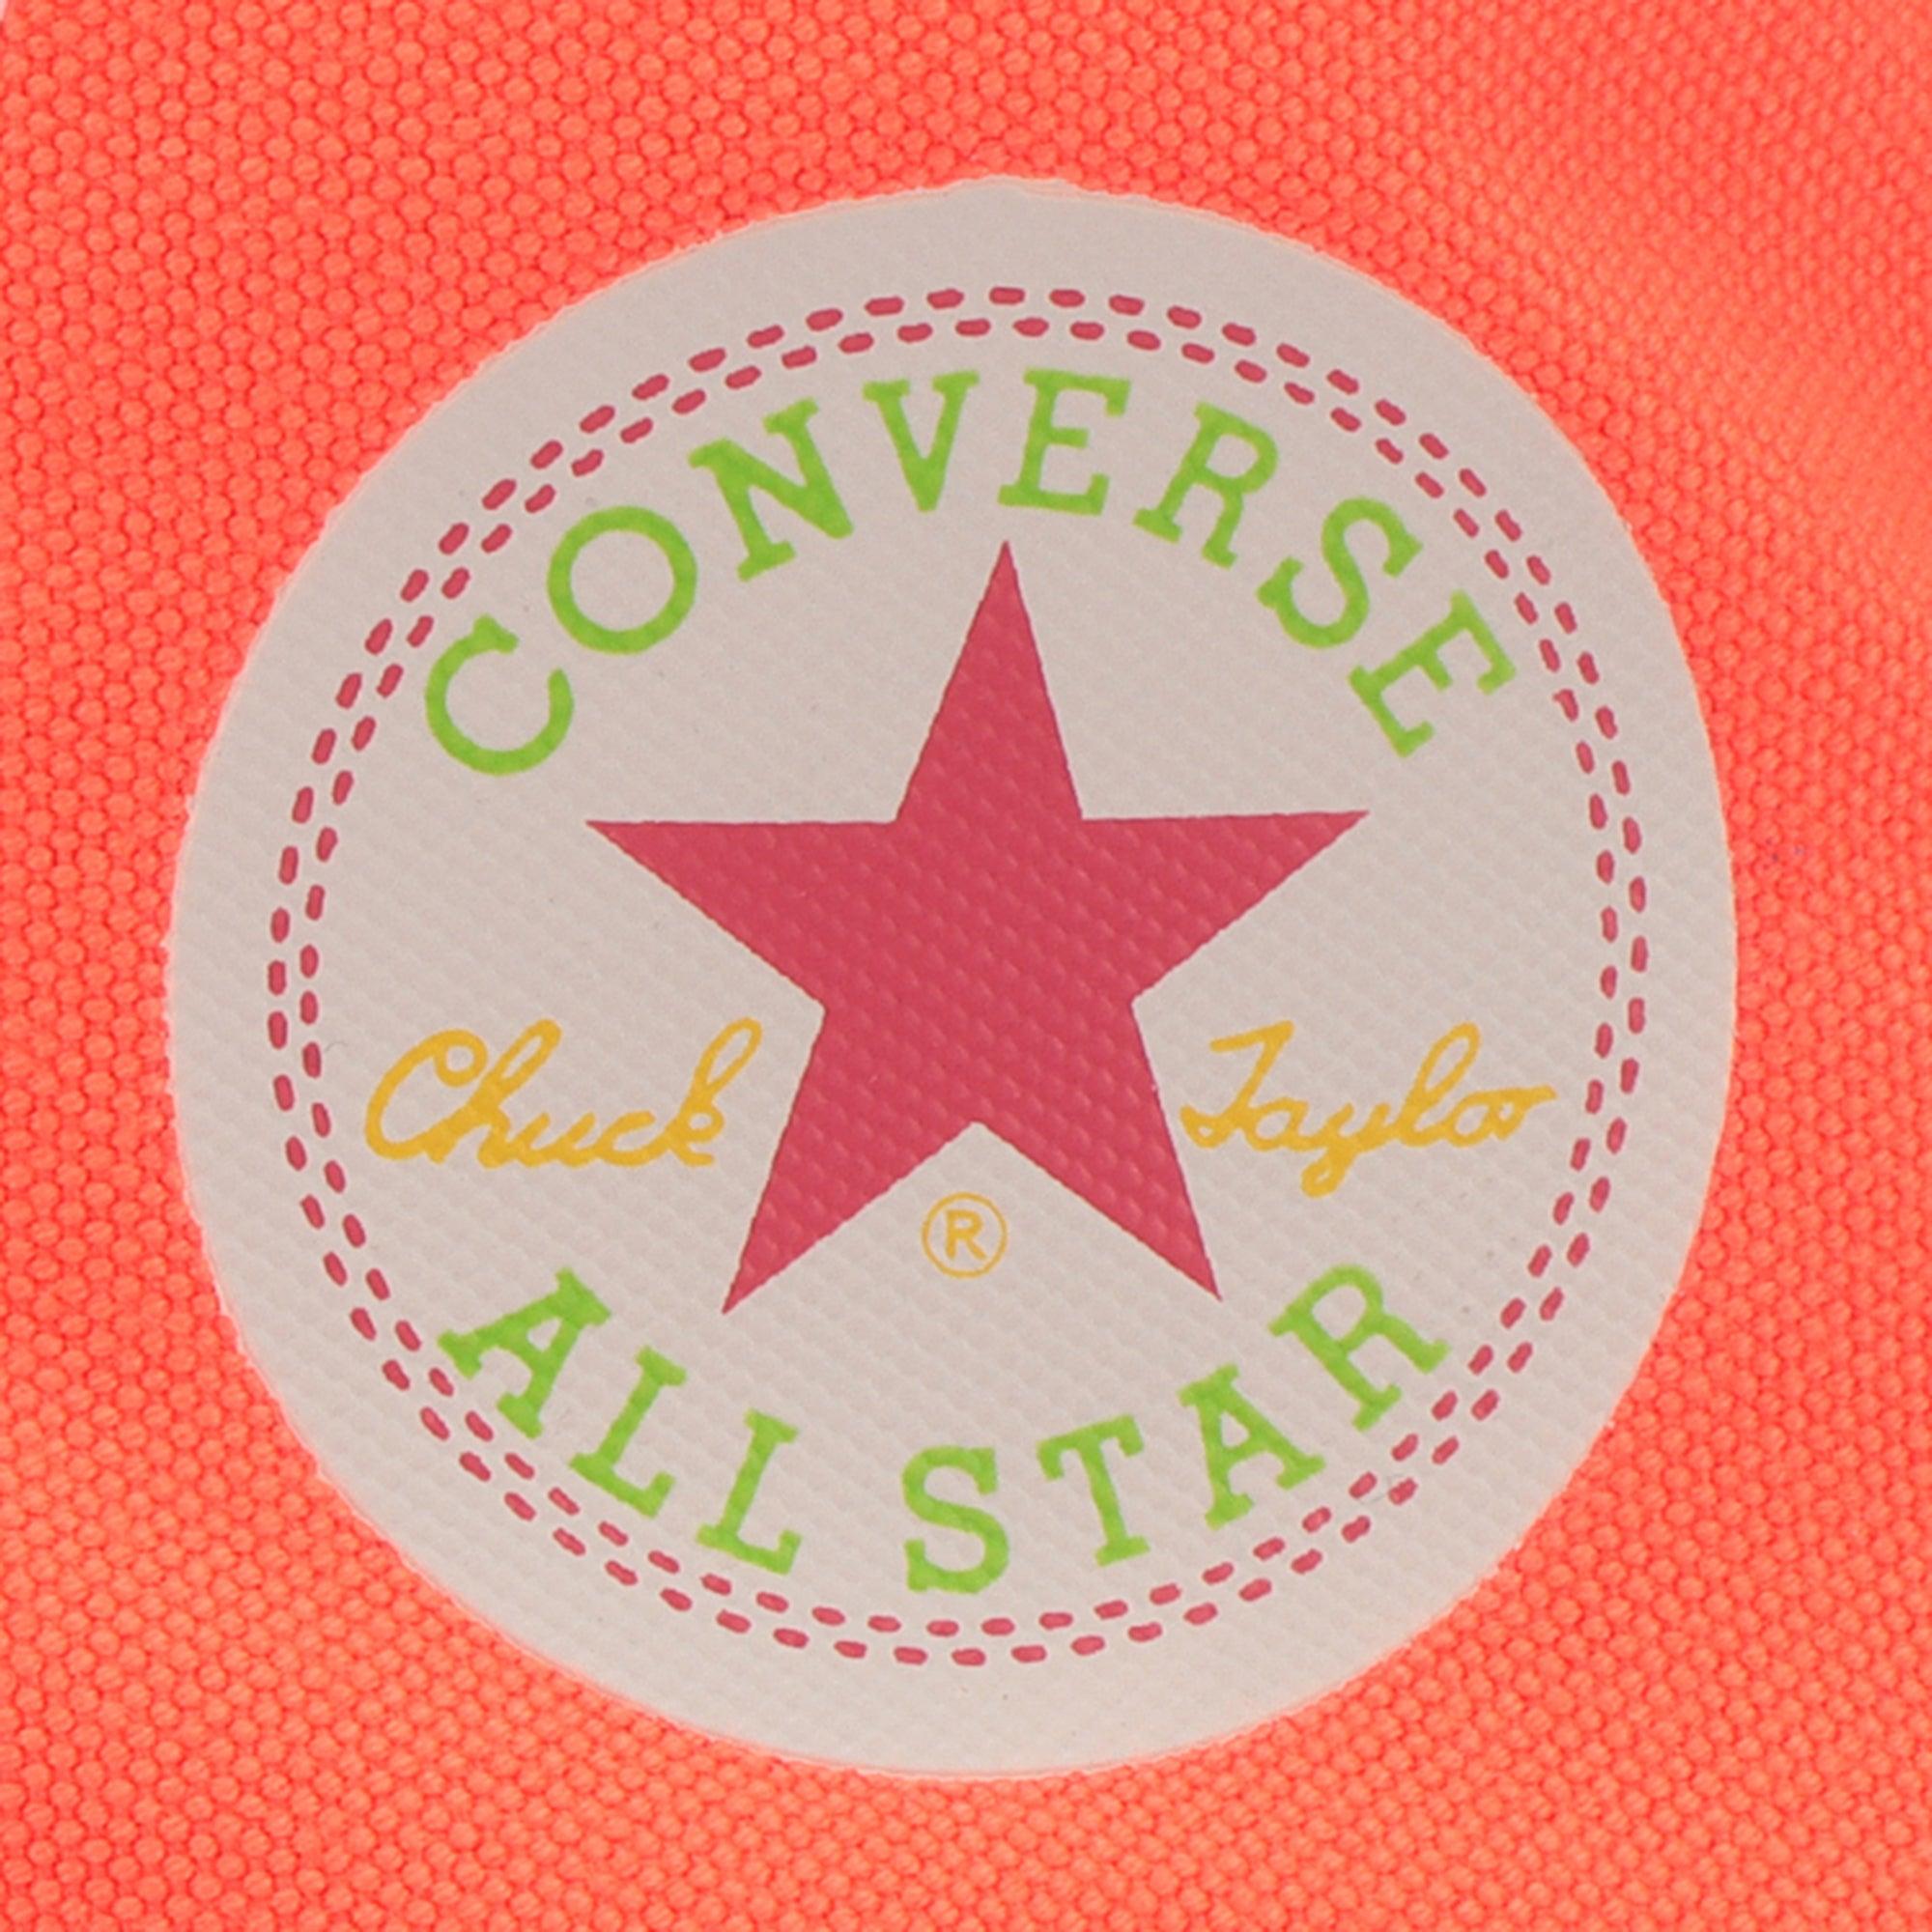 Converse All Star Us Neoncolors Of Hi for Men | Lyst